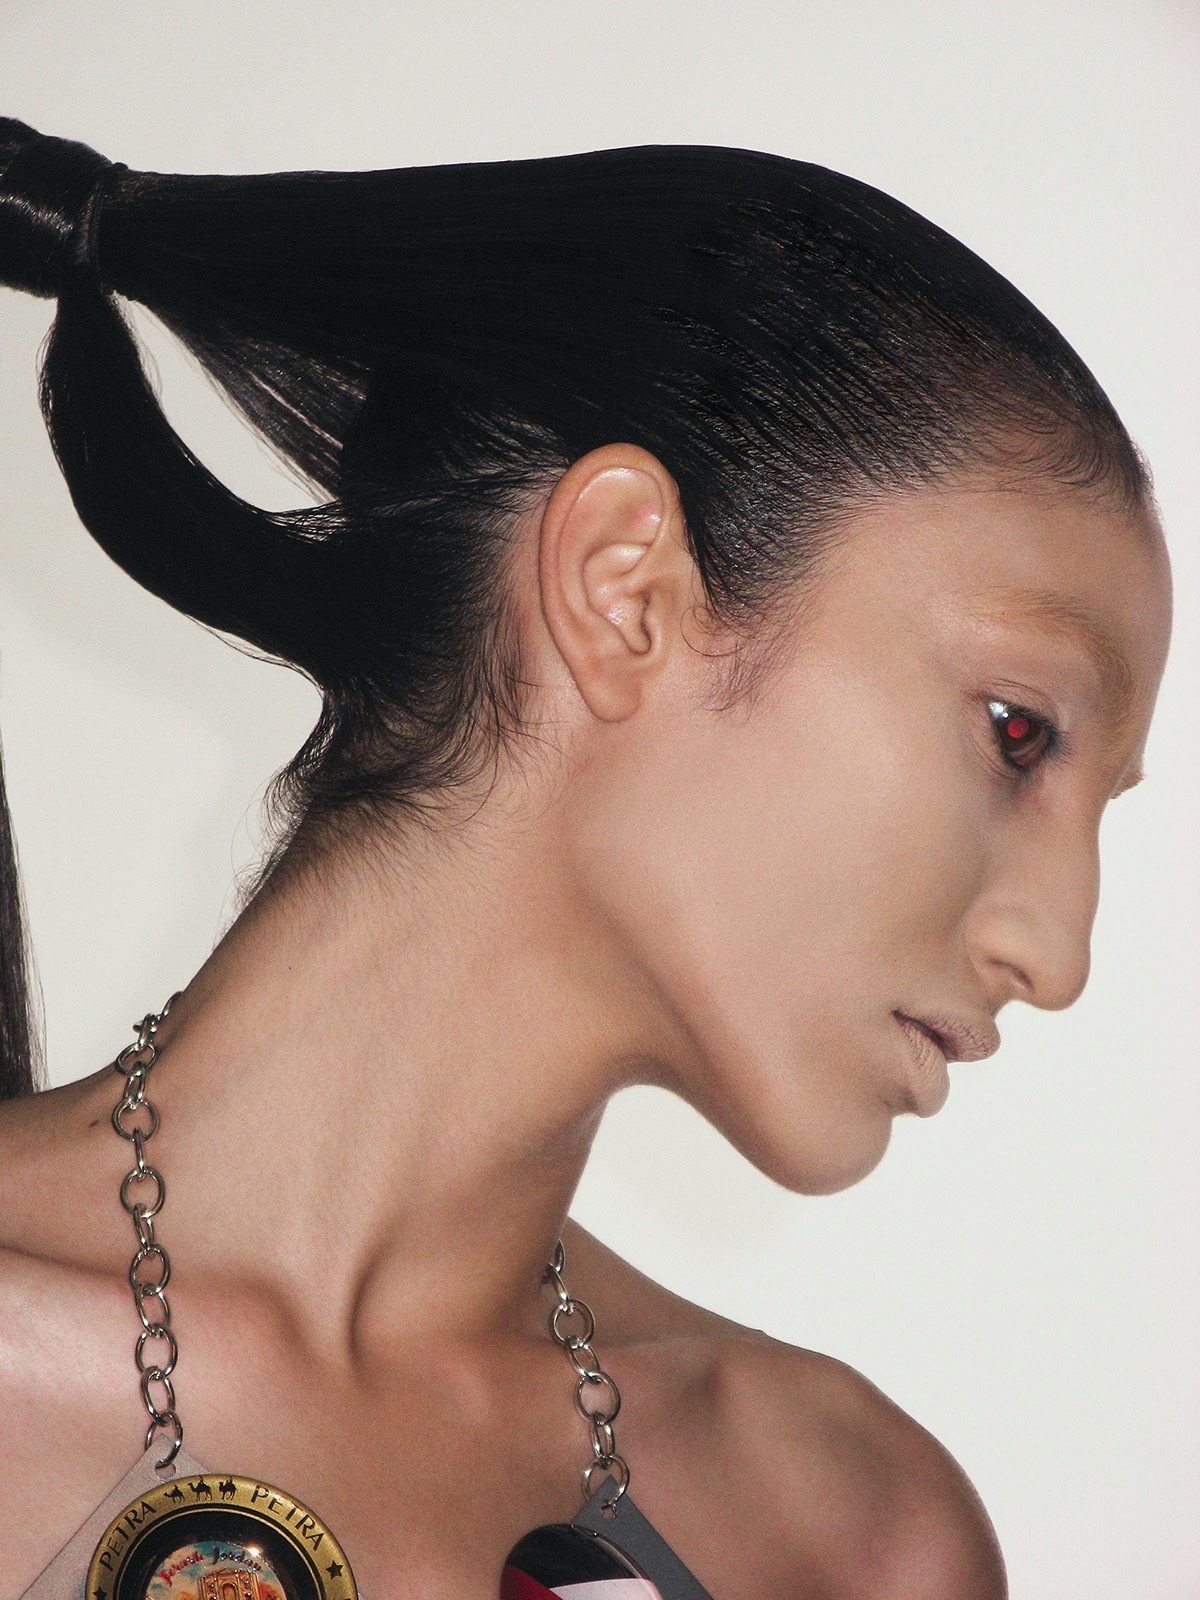 Image by Harley Weir of the profile of a model wearing a thick neck chain